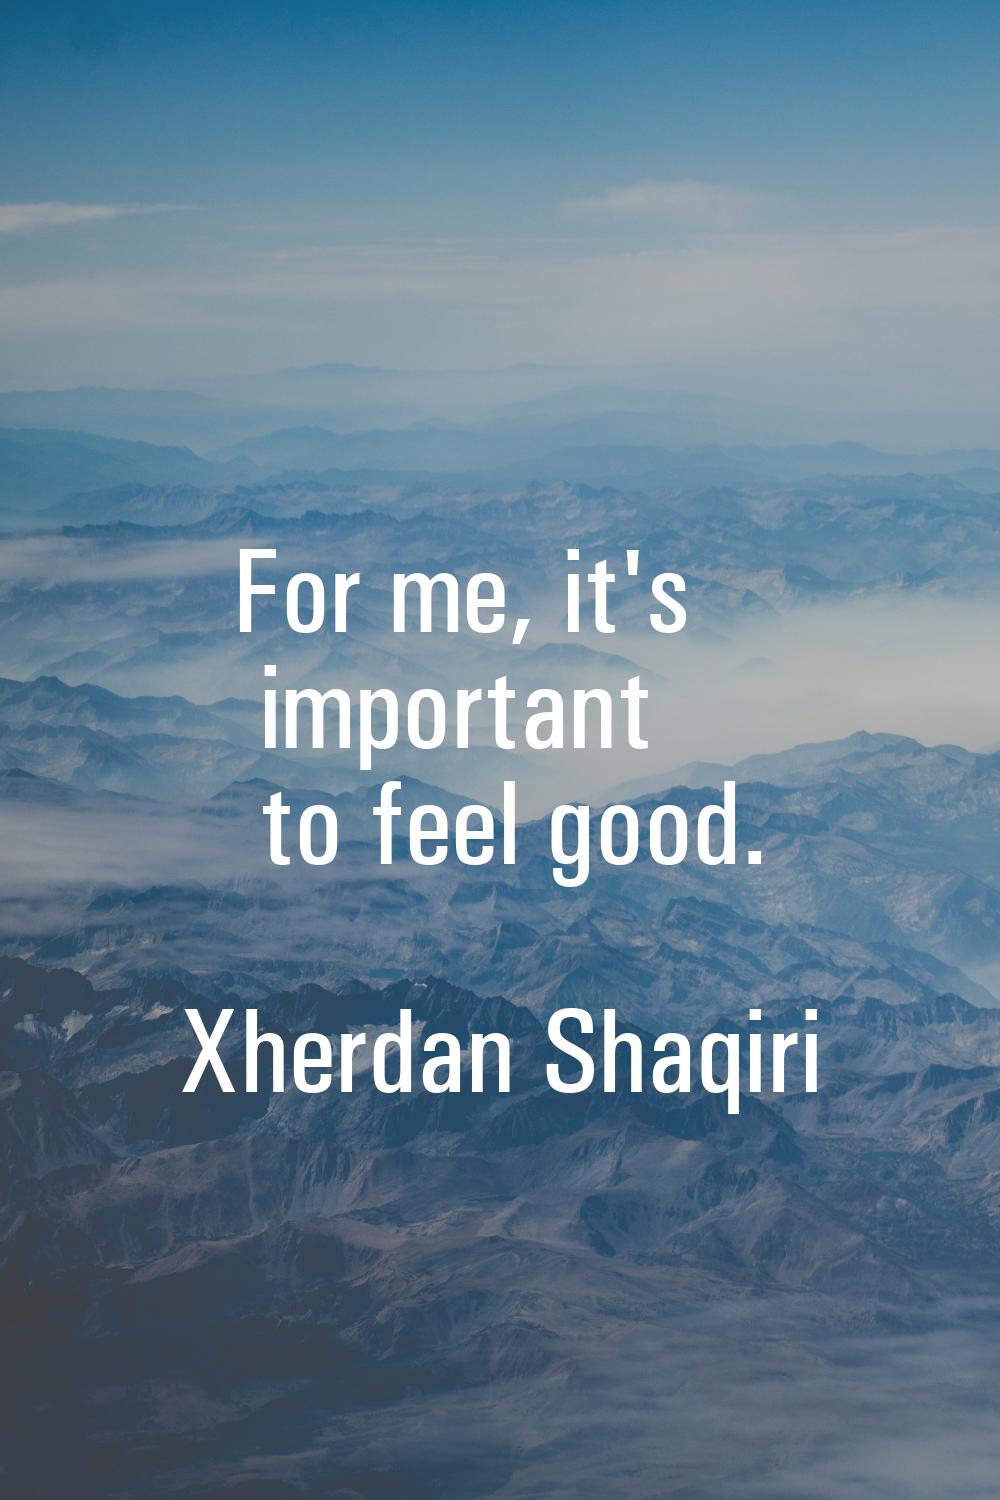 For me, it's important to feel good.